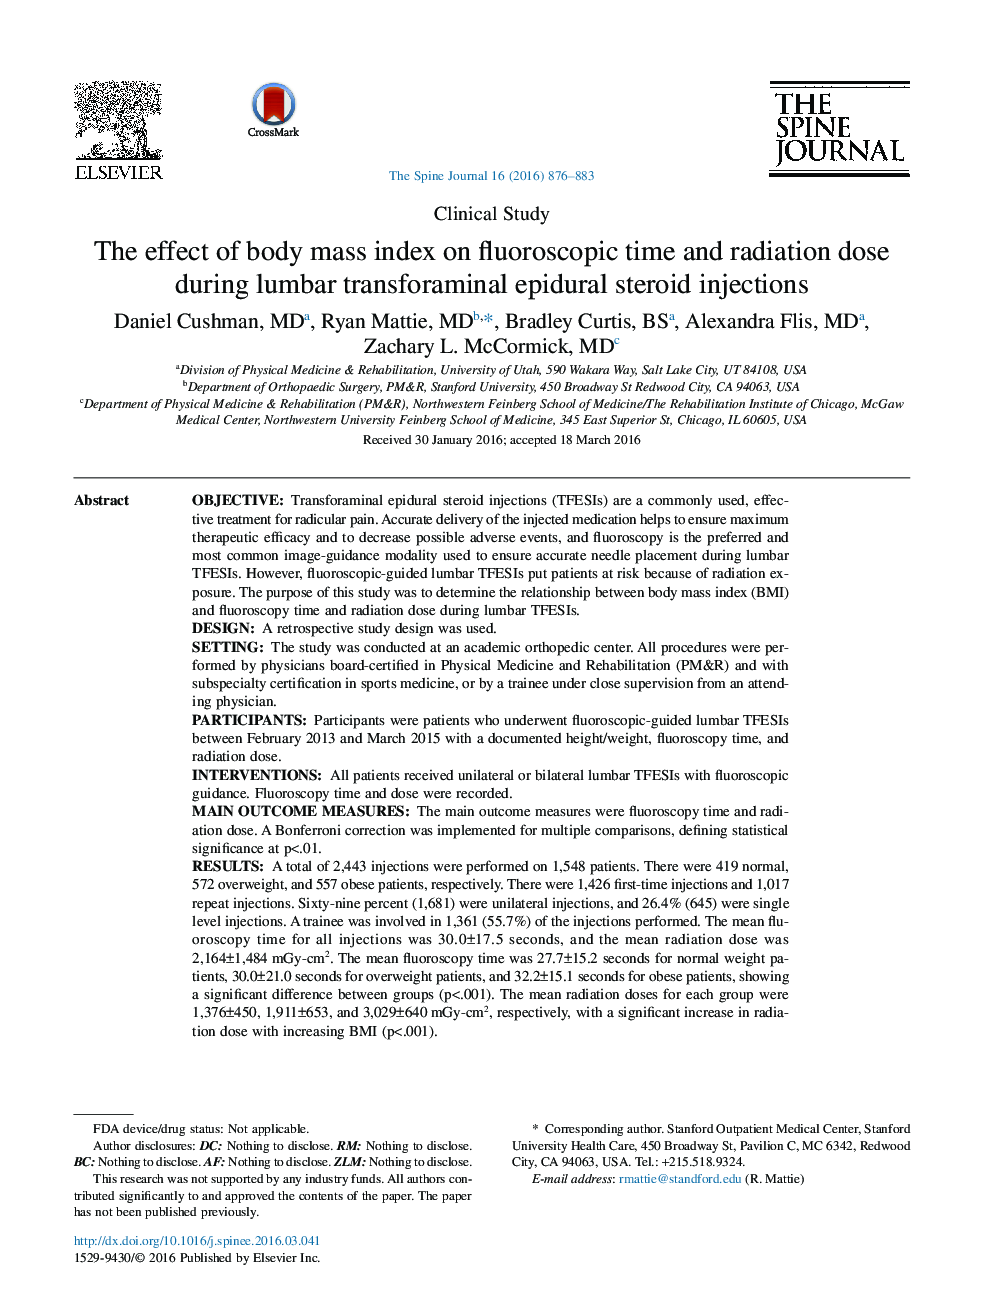 The effect of body mass index on fluoroscopic time and radiation dose during lumbar transforaminal epidural steroid injections 